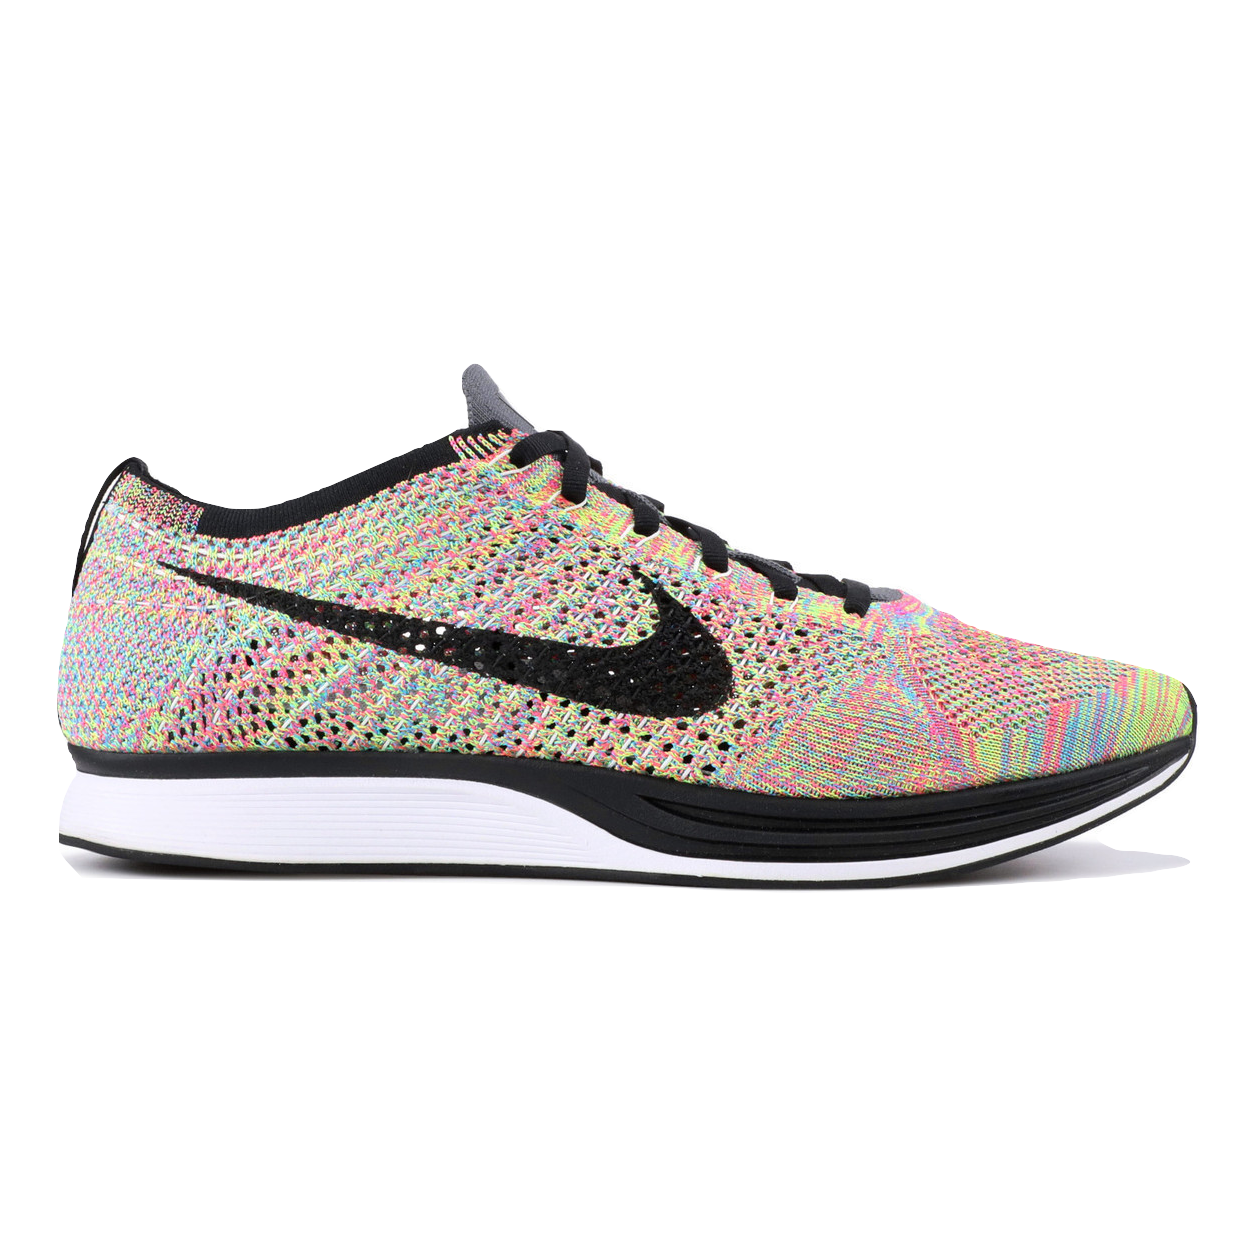 Nike Flyknit Racer - Multi-Color Grey Tongue